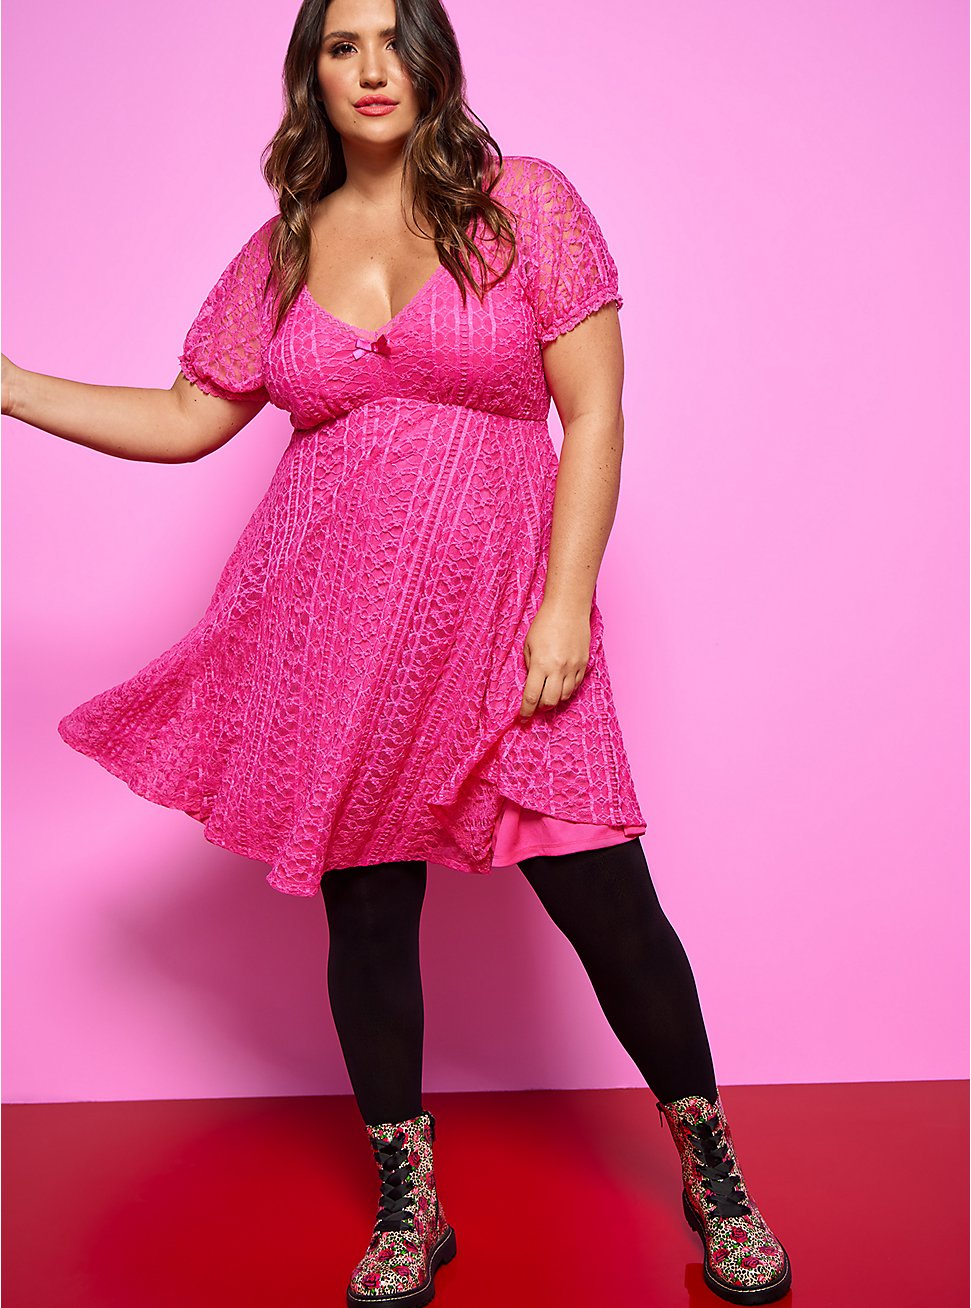 Plus Size Betsey Johnson Fit & Flare Puff Sleeve  Mini Dress - Pink, PINK GLO, hi-res